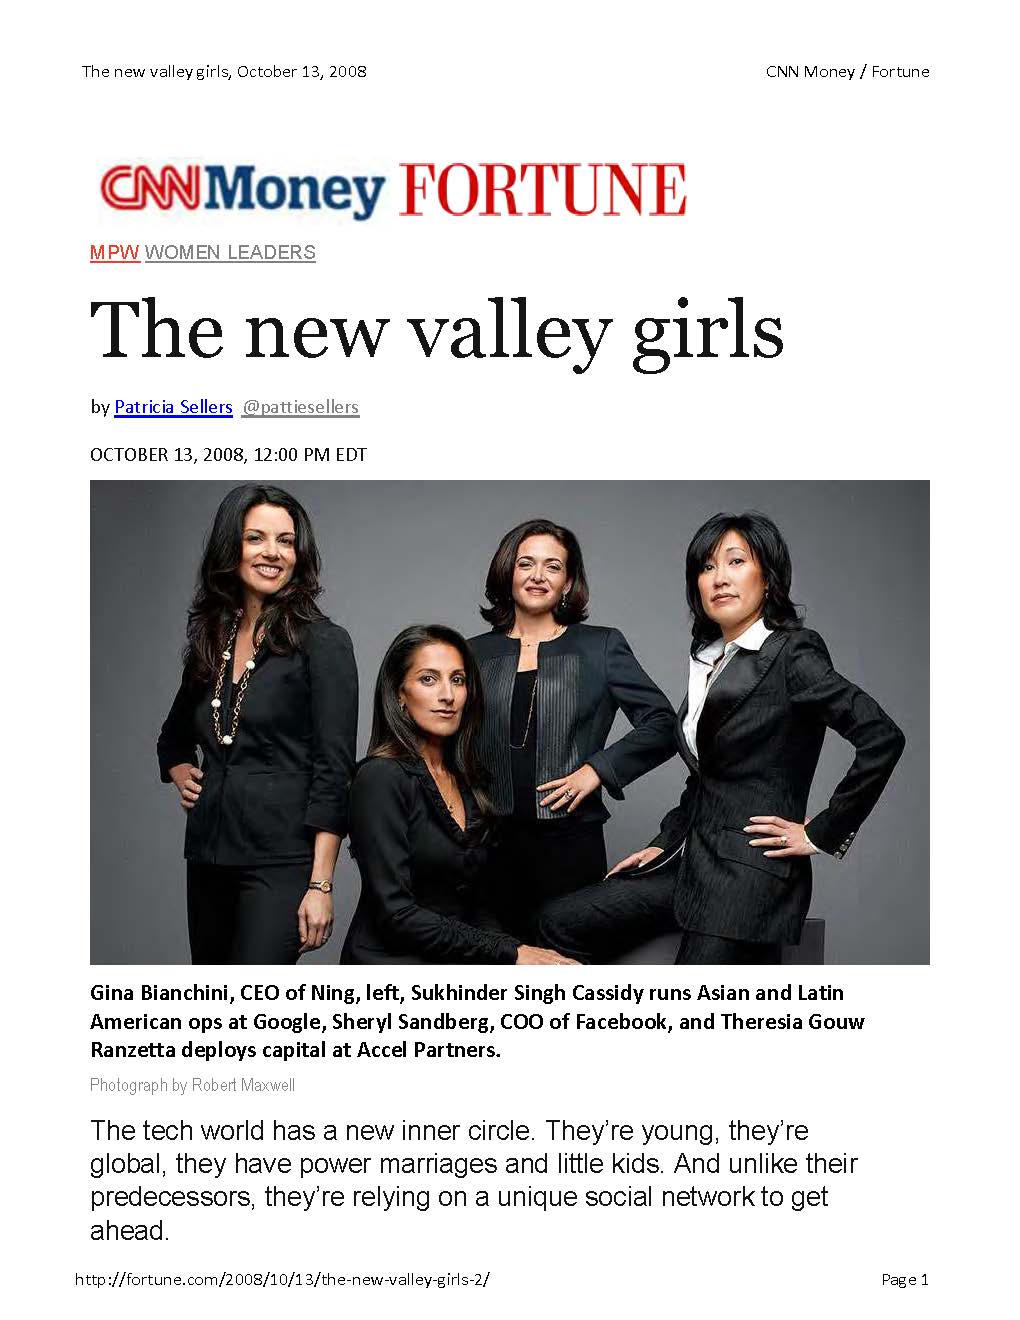 Patricia Sellers. (Oct. 13, 2008). The new valley girls. CNNMoney Fortune.